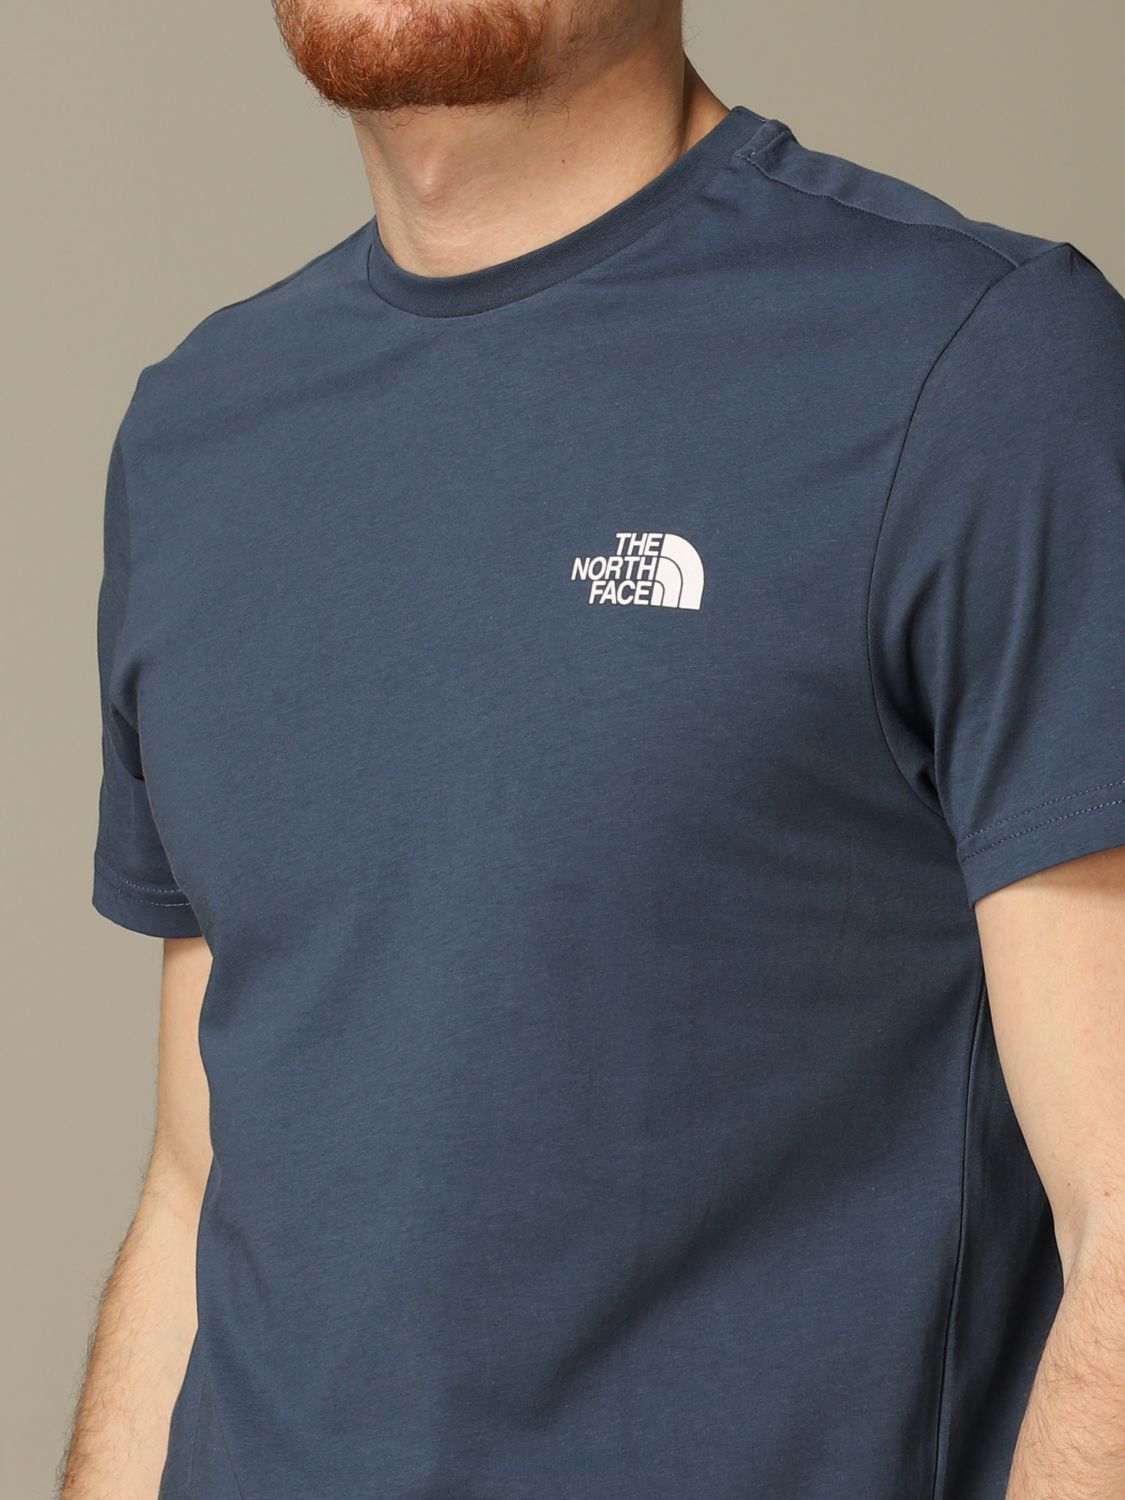 The North Face Outlet: T-shirt men - Blue | T-Shirt The North Face ...